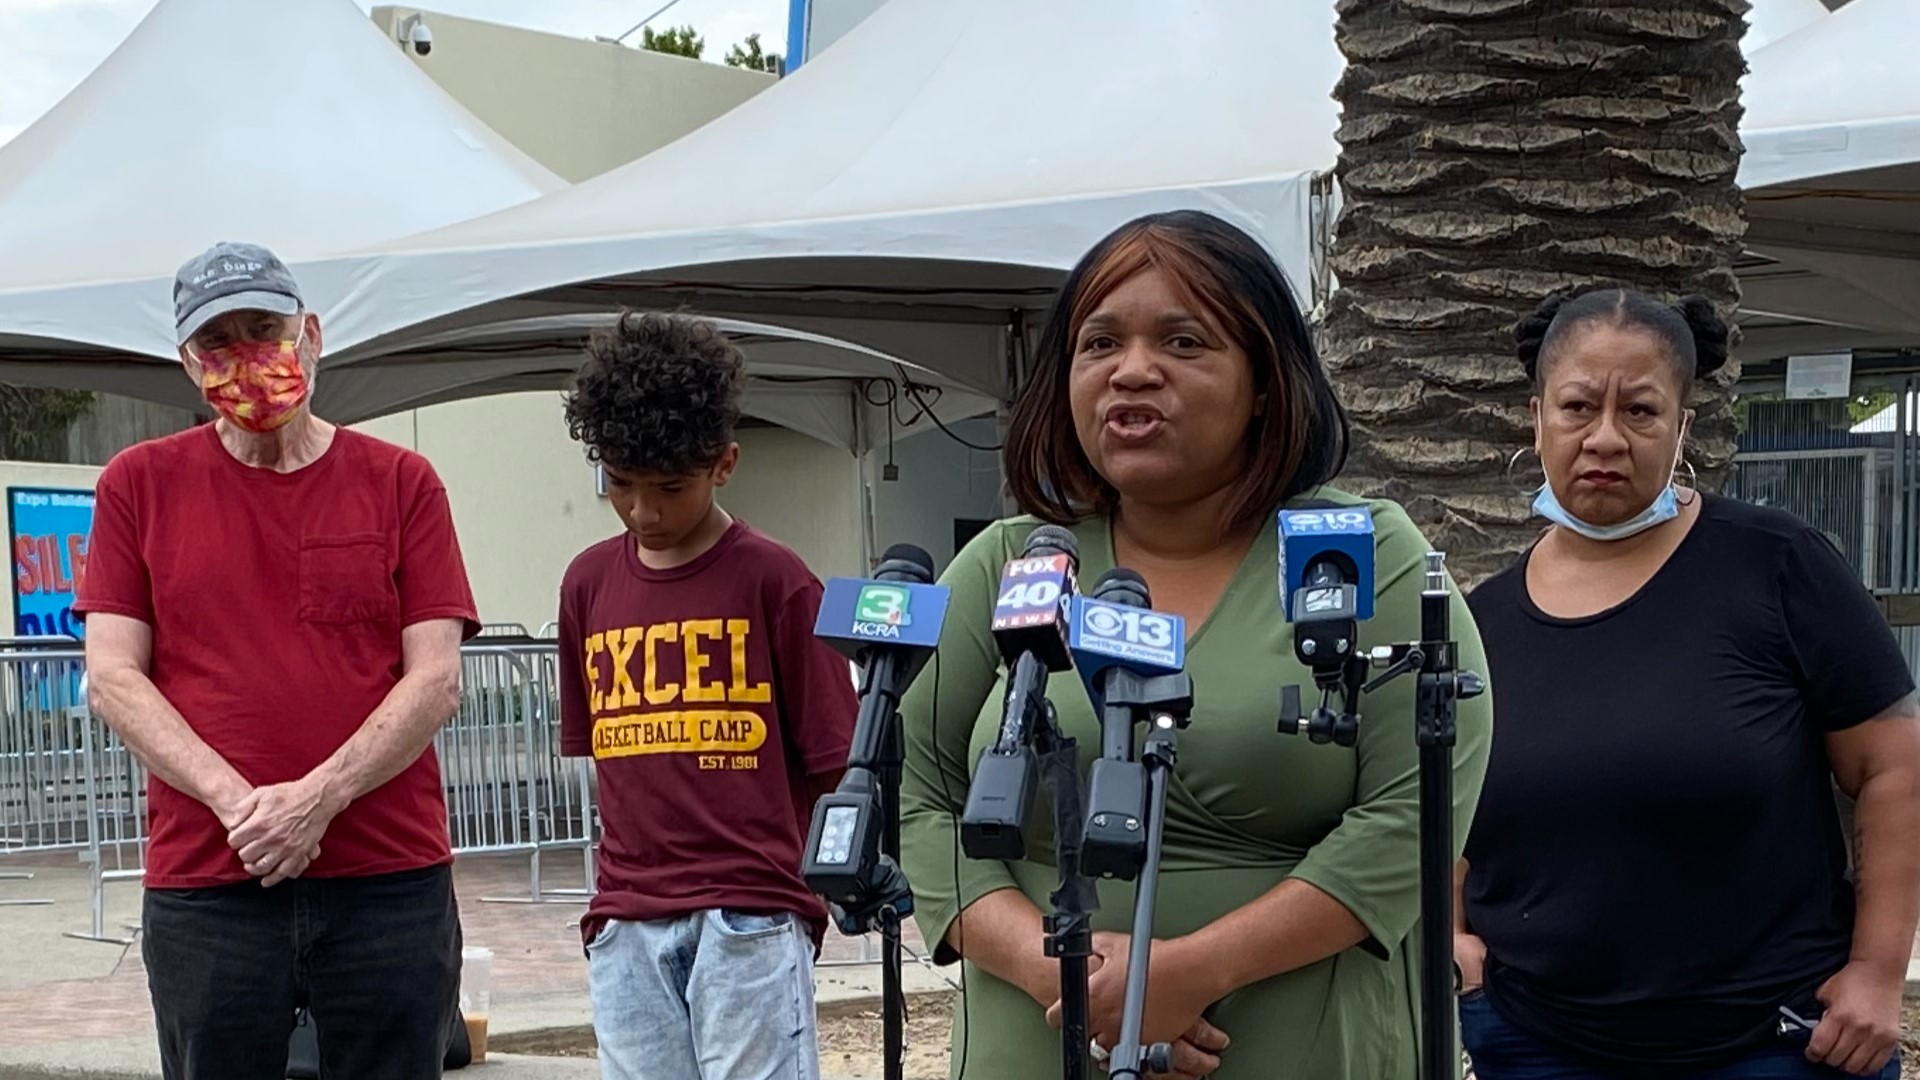 Cal Expo is defending their officers saying the child "was demonstrating dangerous behavior that put himself and others at risk of severe physical harm..."